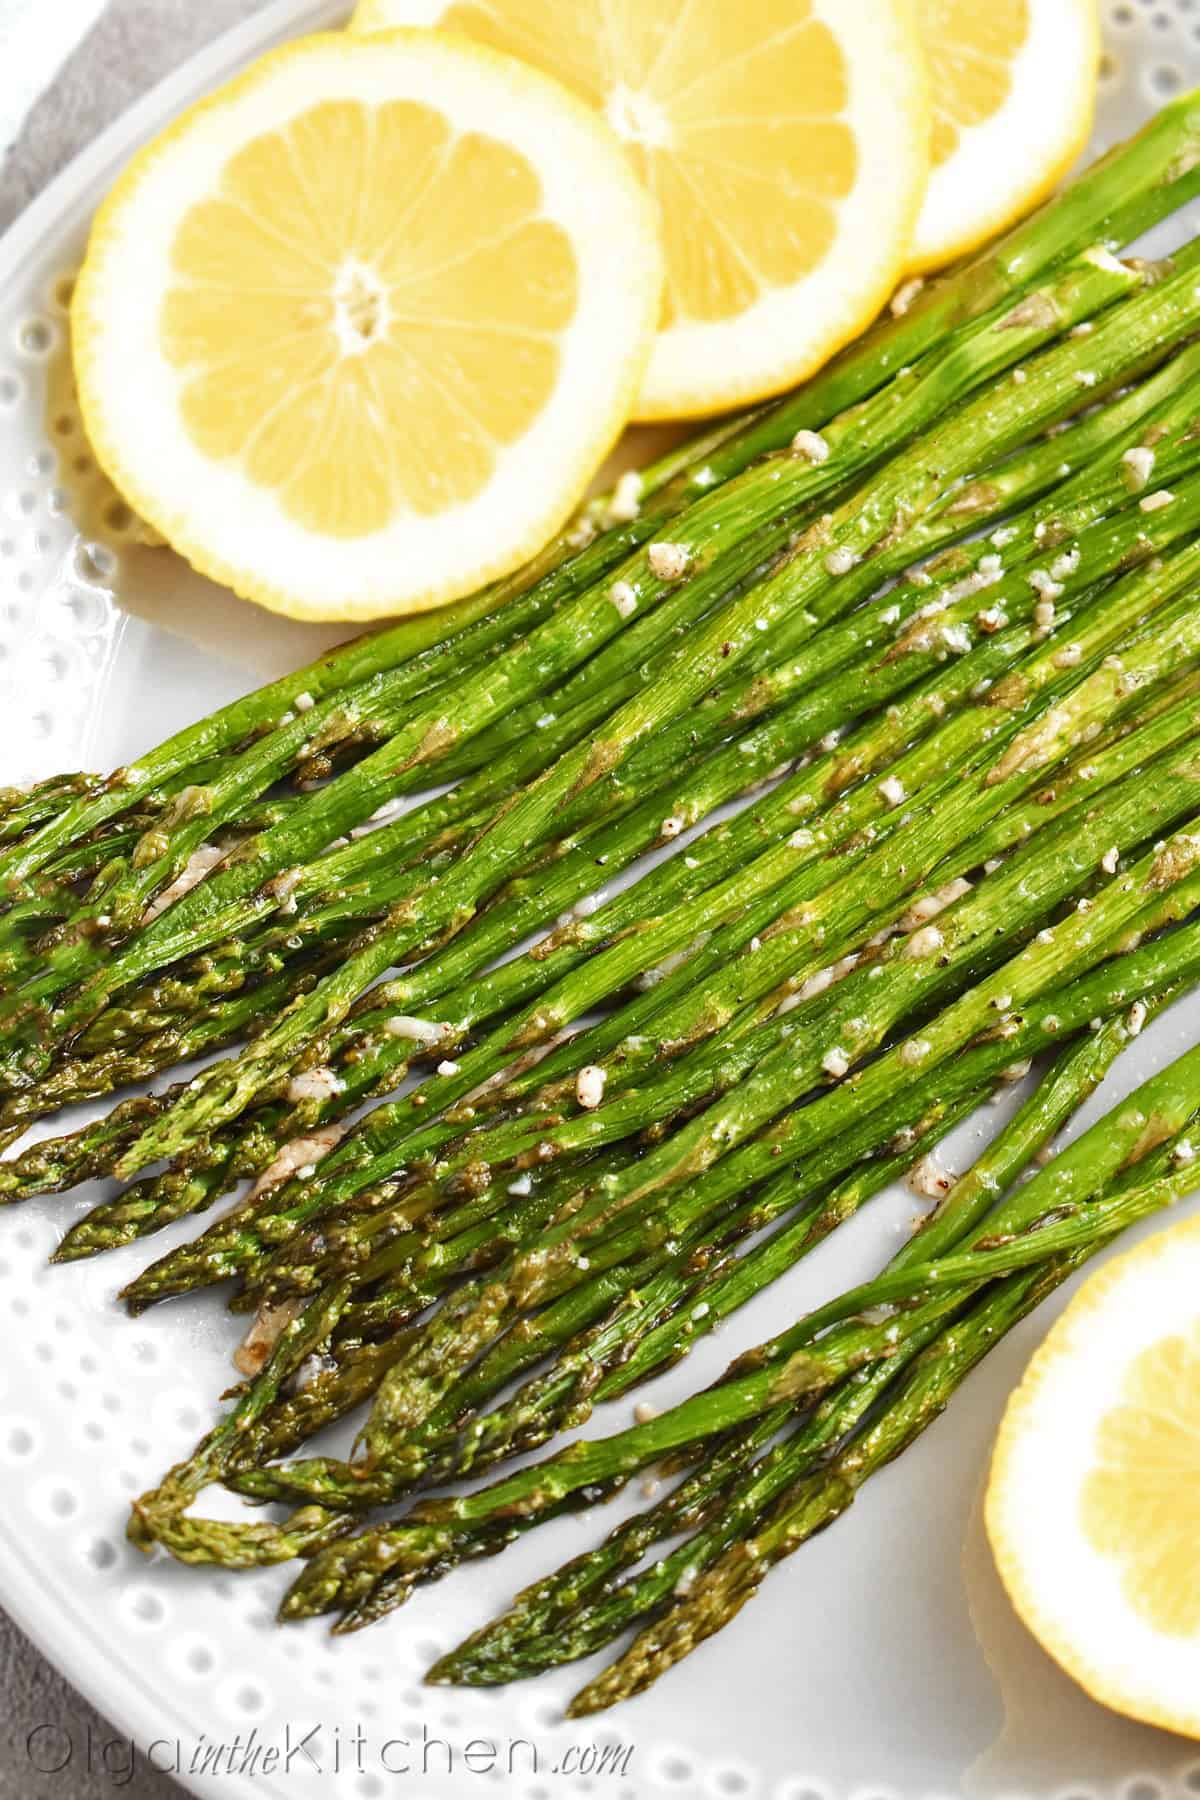 Roasted Asparagus with Parmesan: an easy and super tasty side dish to any main dish in 20 minutes. We like these with grilled pork, beef, chicken or any salmon dish. | olgainthekitchen.com